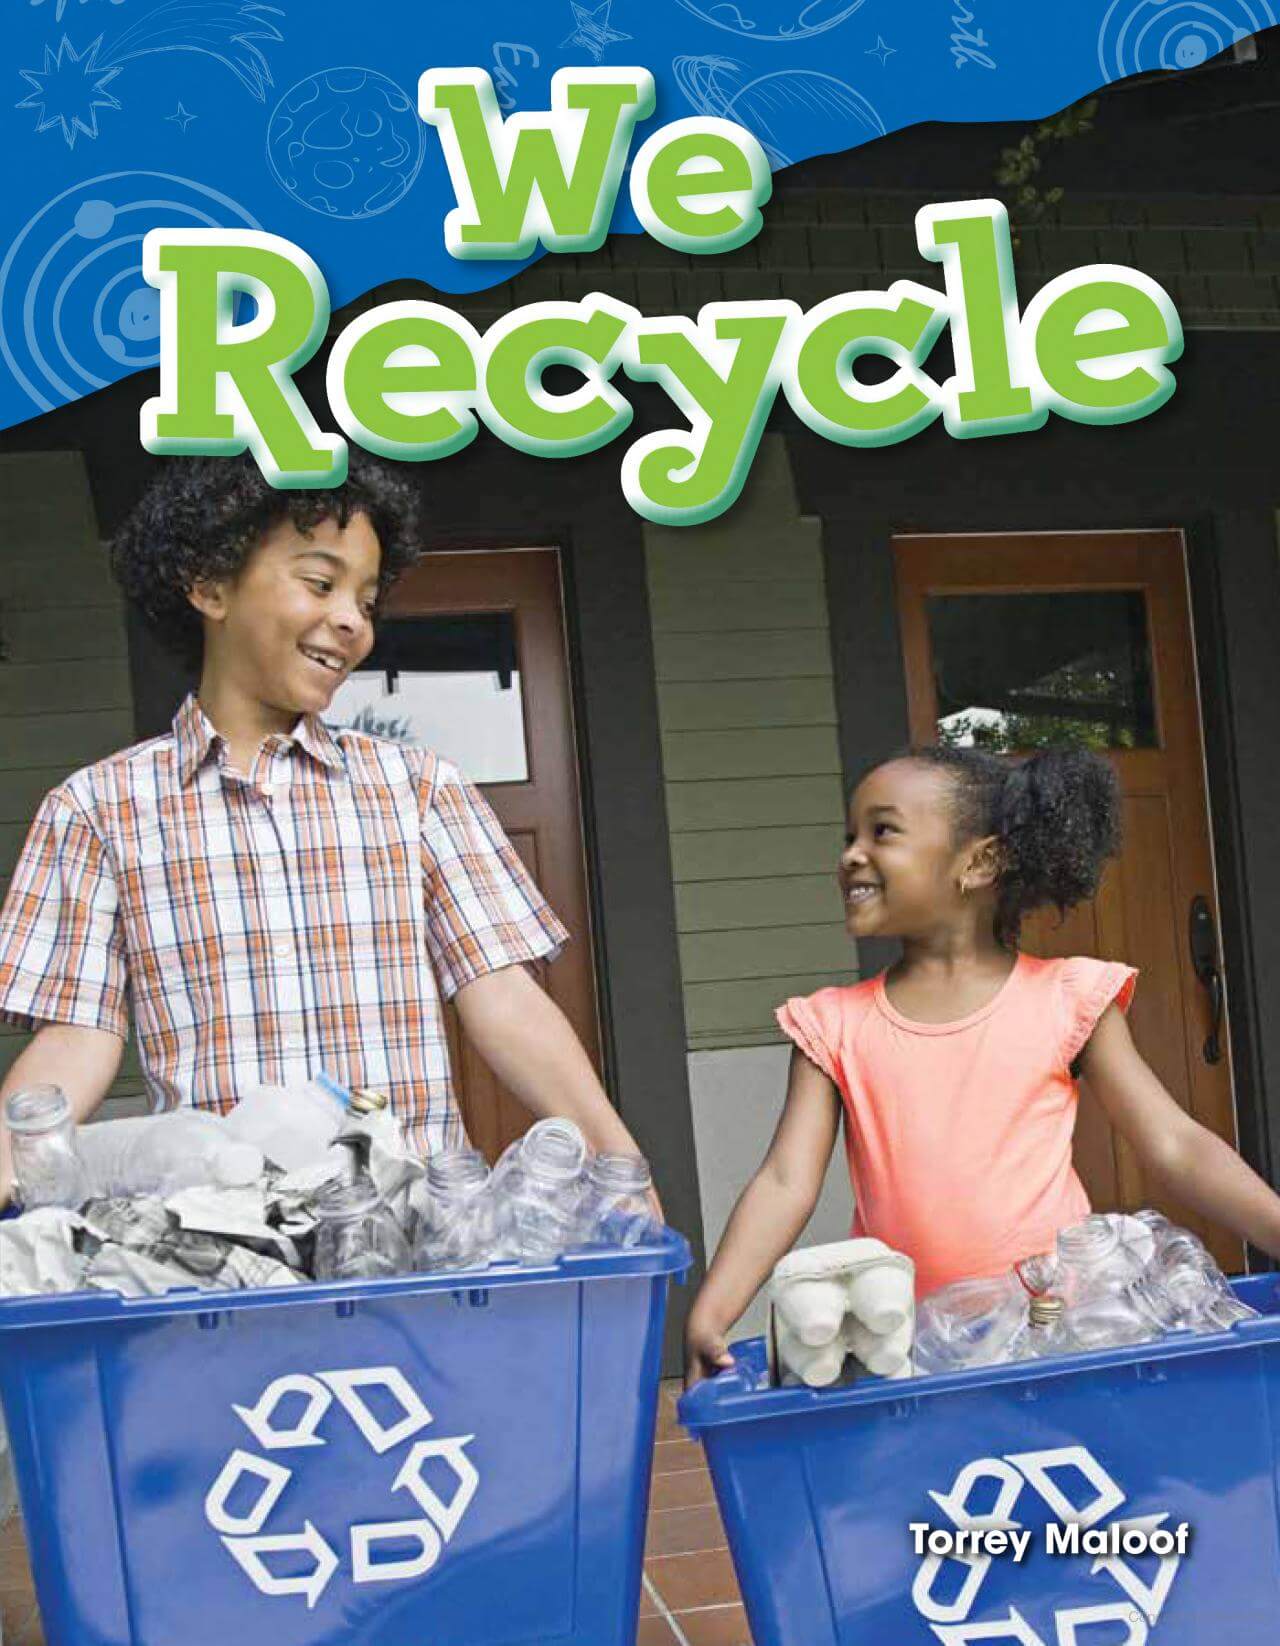 We Recycle by Torrey Maloof